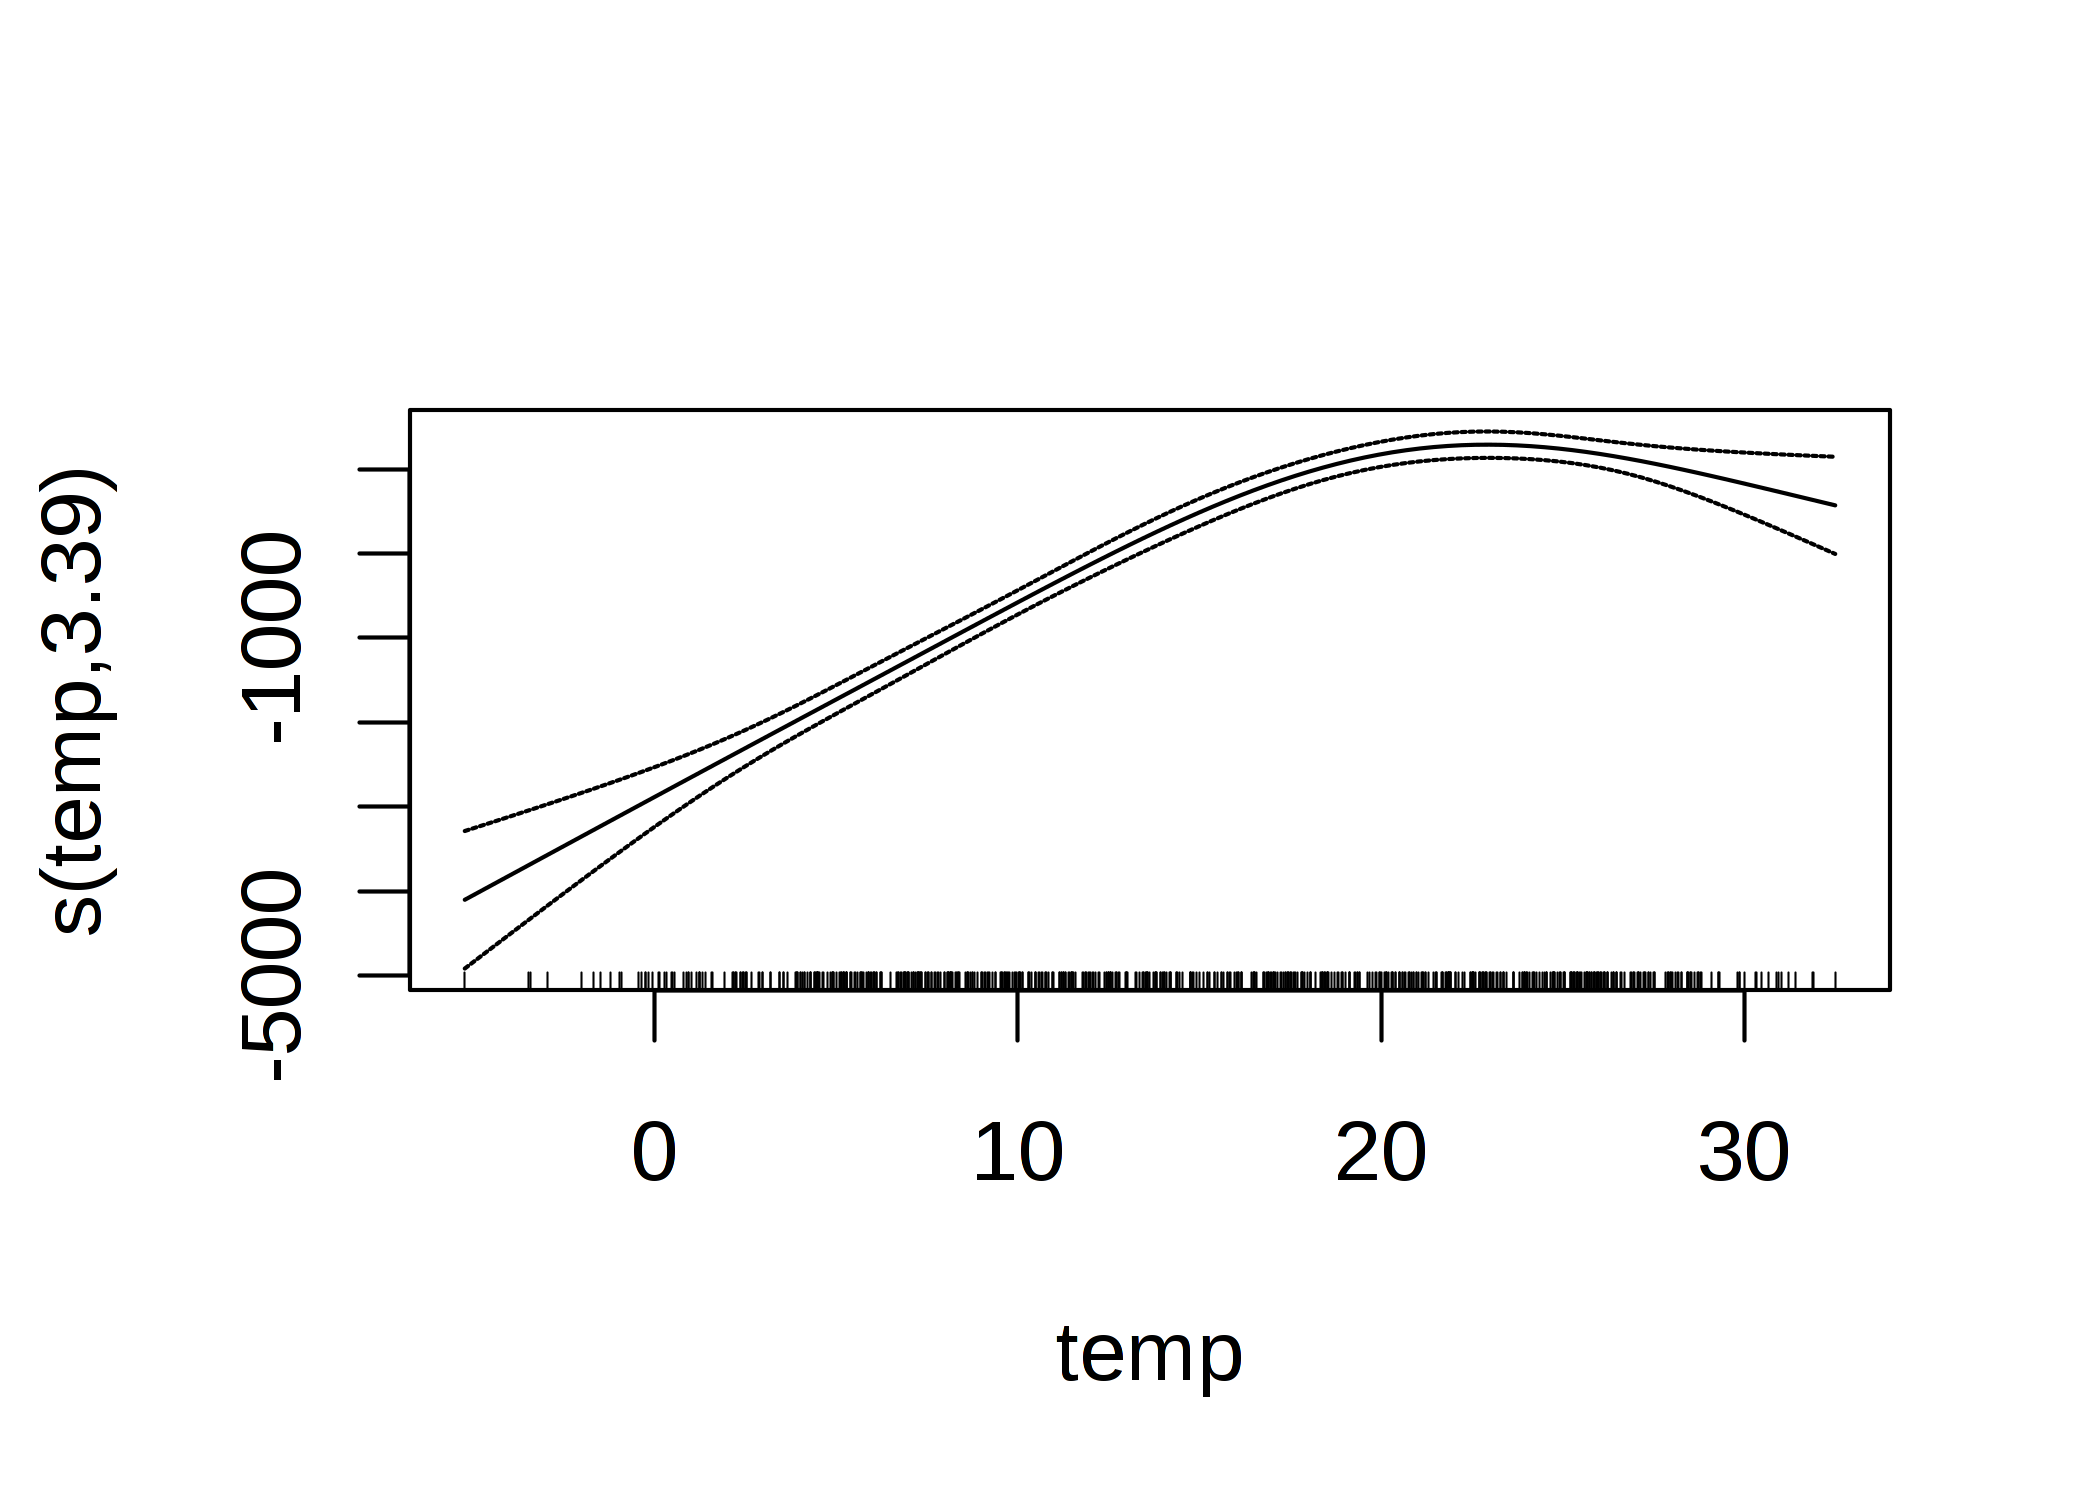 GAM feature effect of the temperature for predicting the number of rented bikes (temperature used as the only feature).